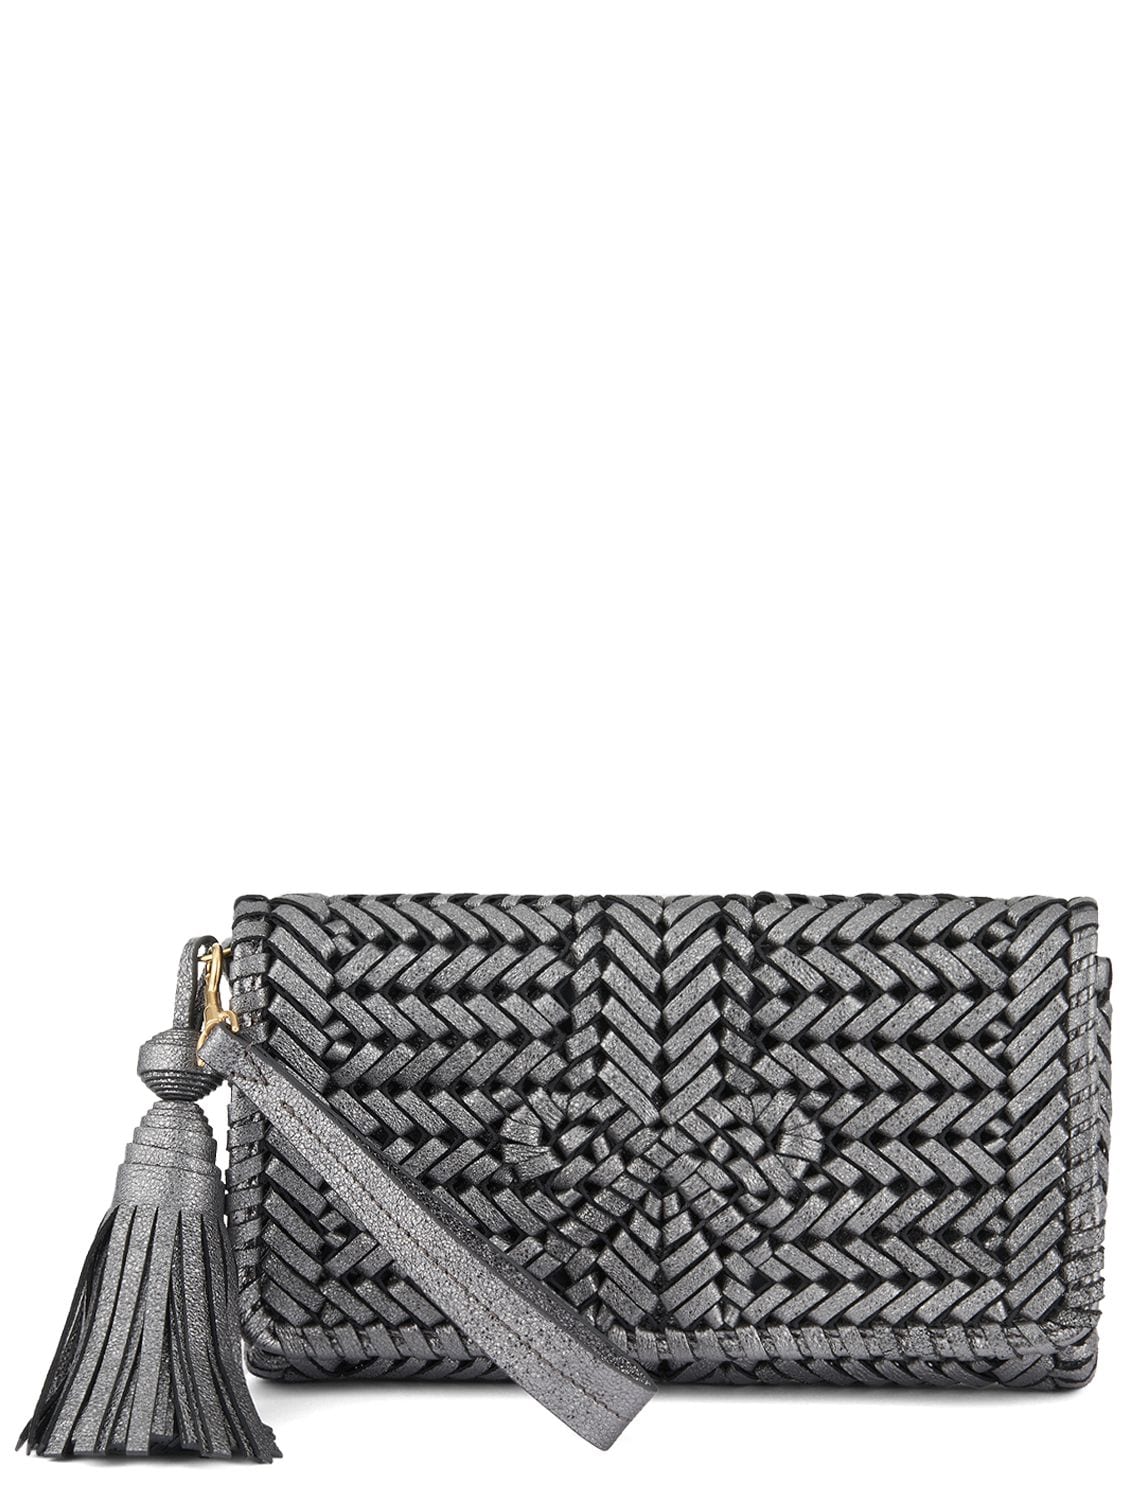 Anya Hindmarch The Neeson Metallic Leather Clutch In Anthrazit